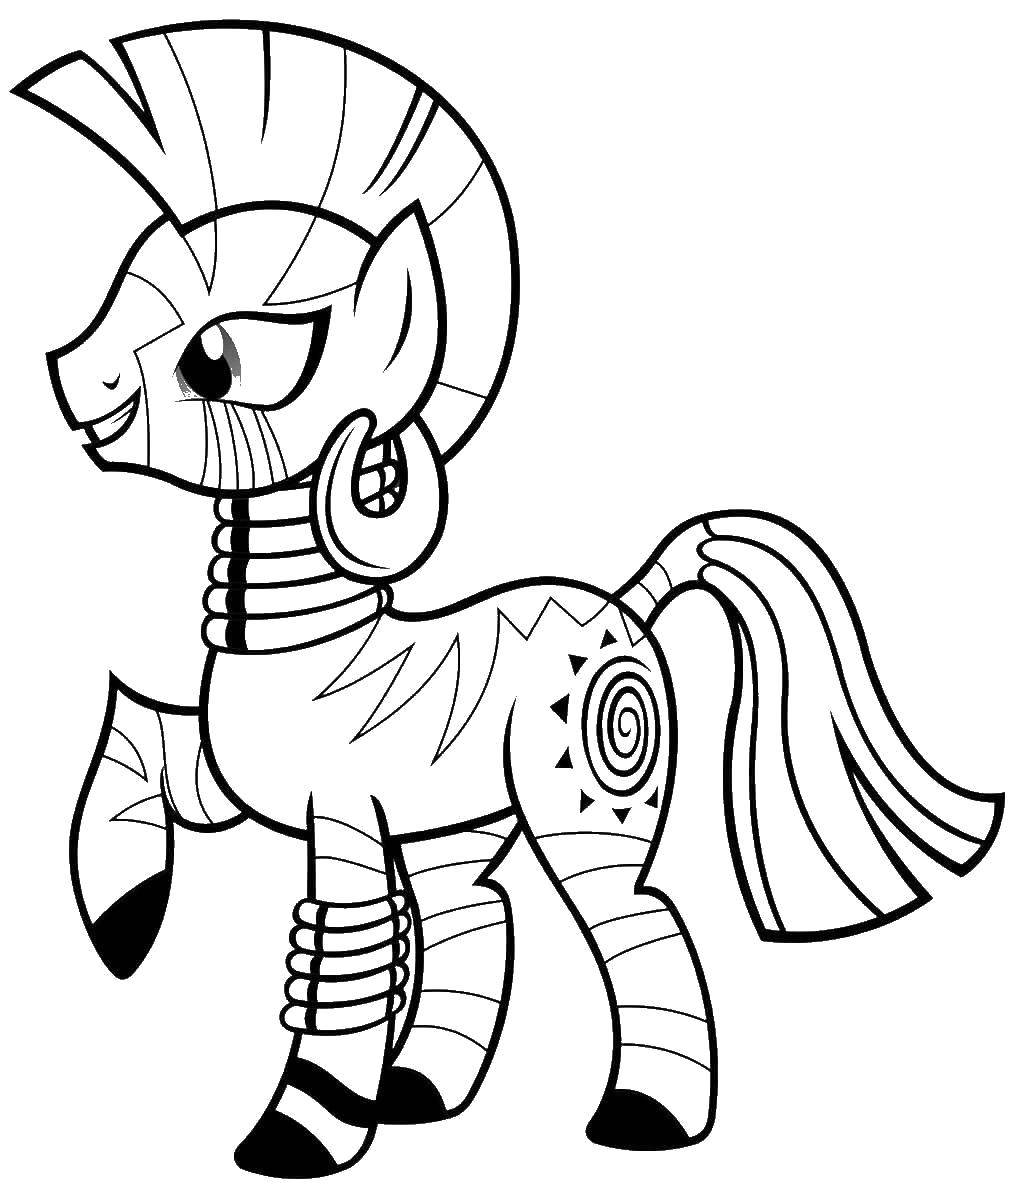 Coloring Unusual pony. Category my little pony. Tags:  Pony, My little pony.